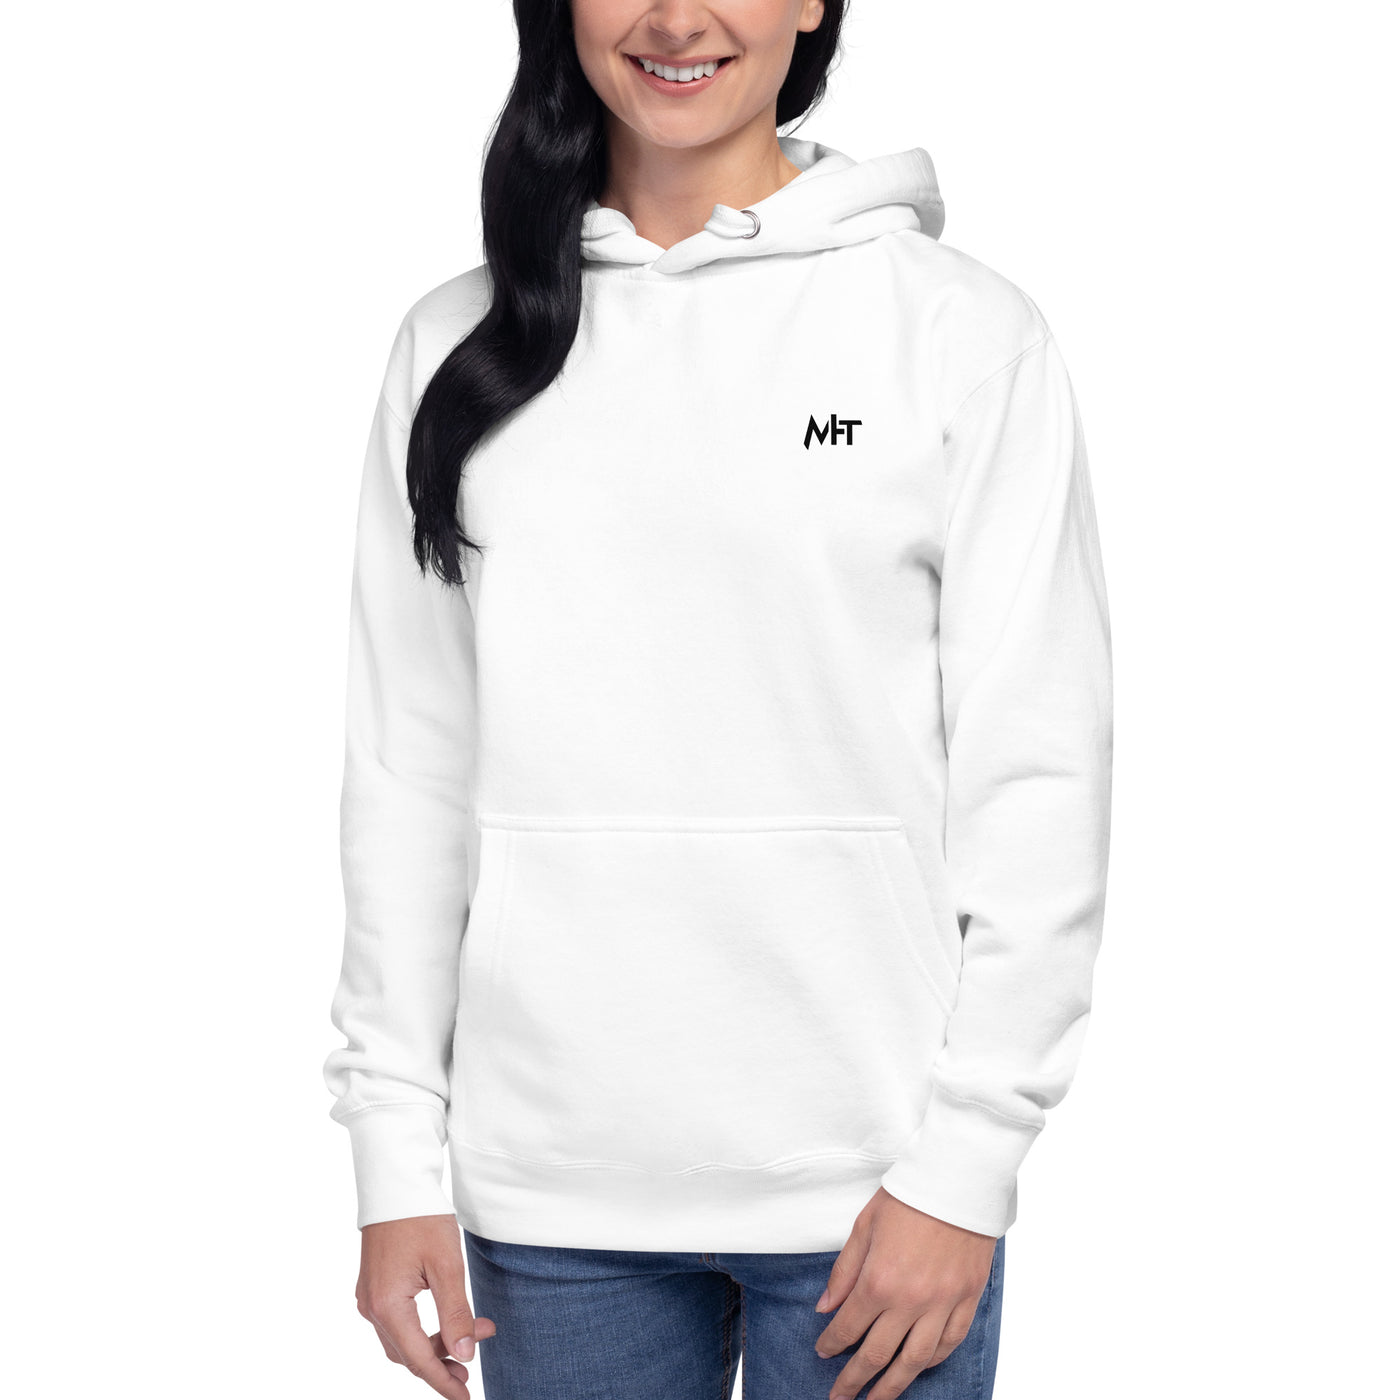 Abduct me, I need a break from Earth - Unisex Hoodie (back print)